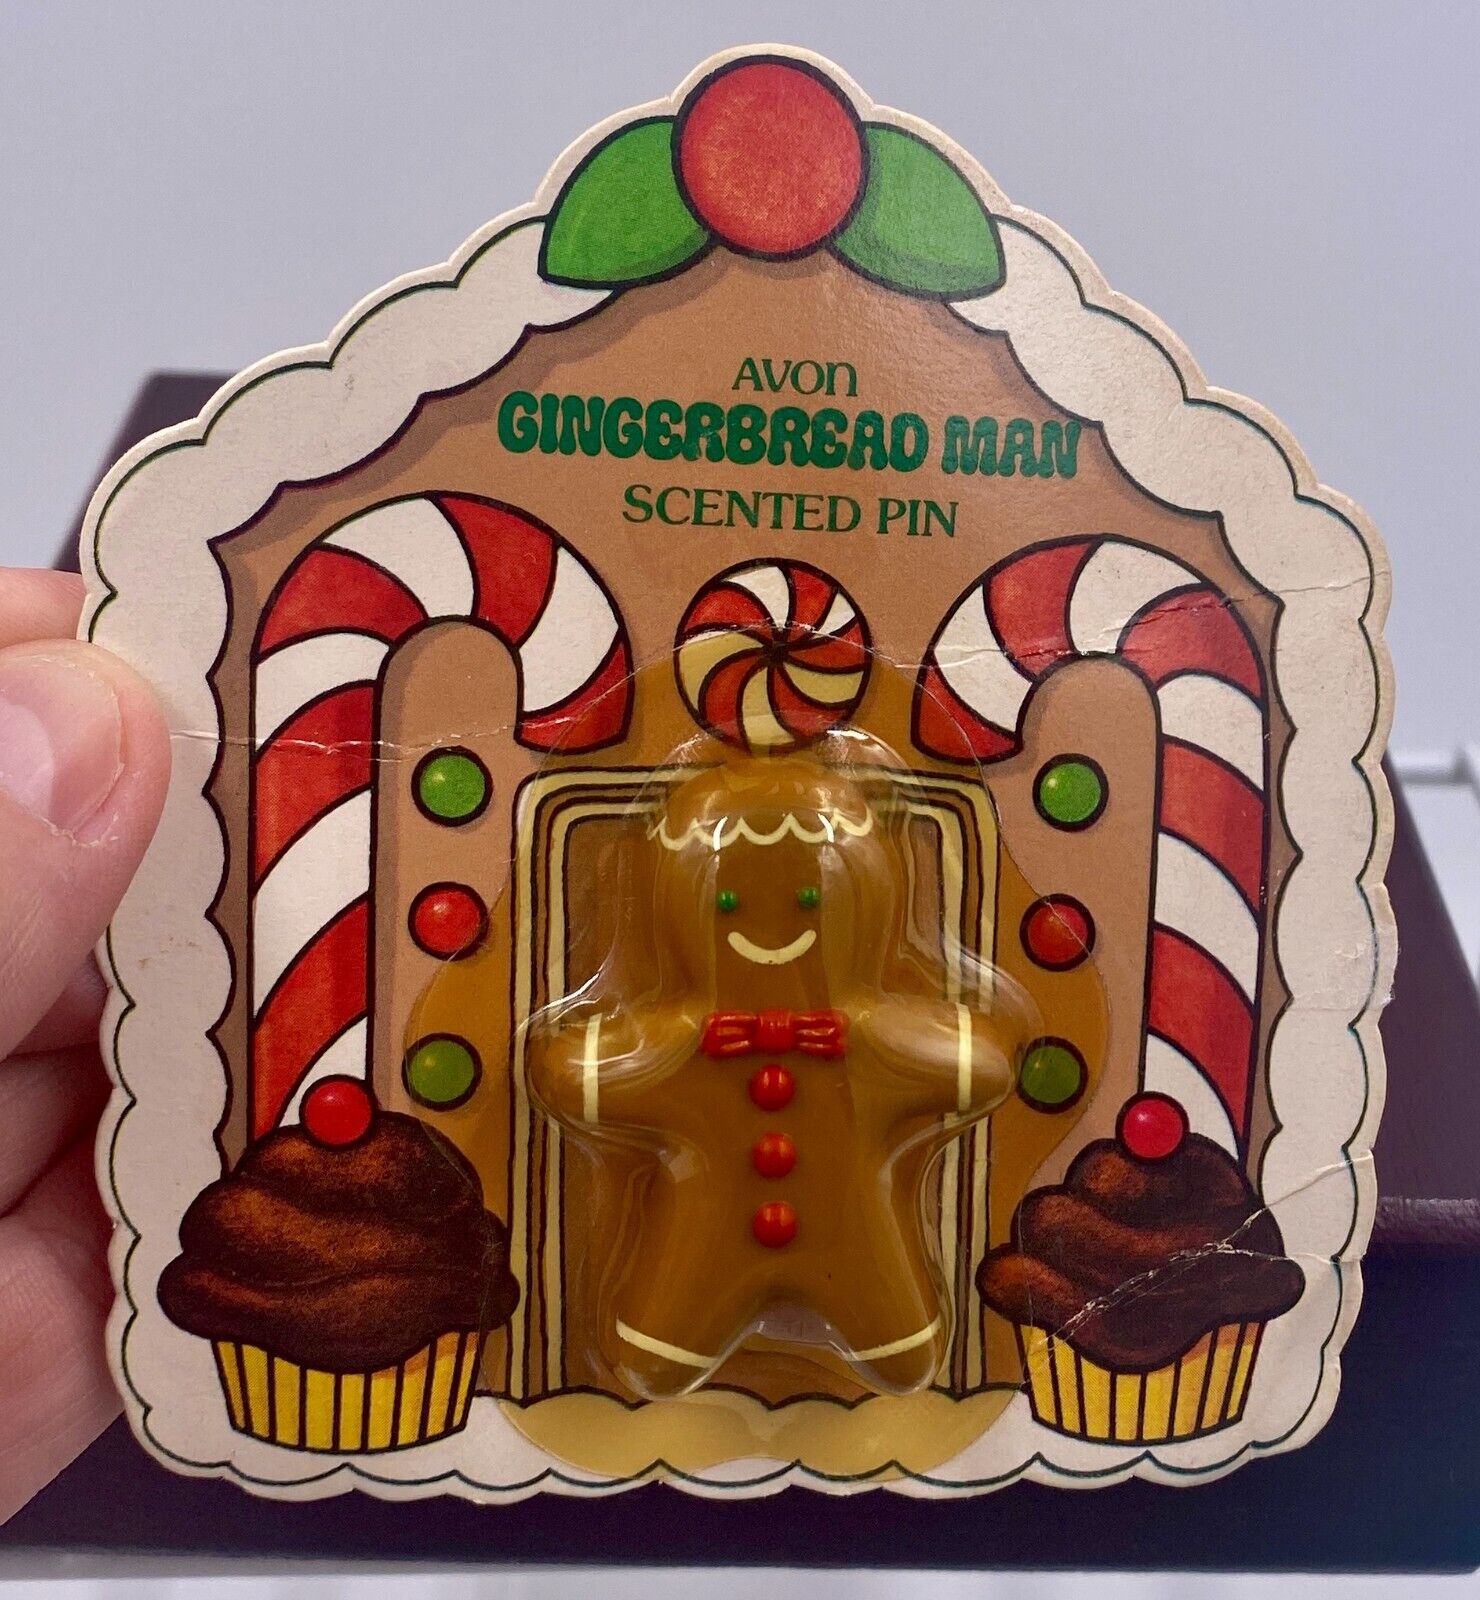 Avon Holiday Pin - Gingerbread Man Scented Pin - On original card - never worn